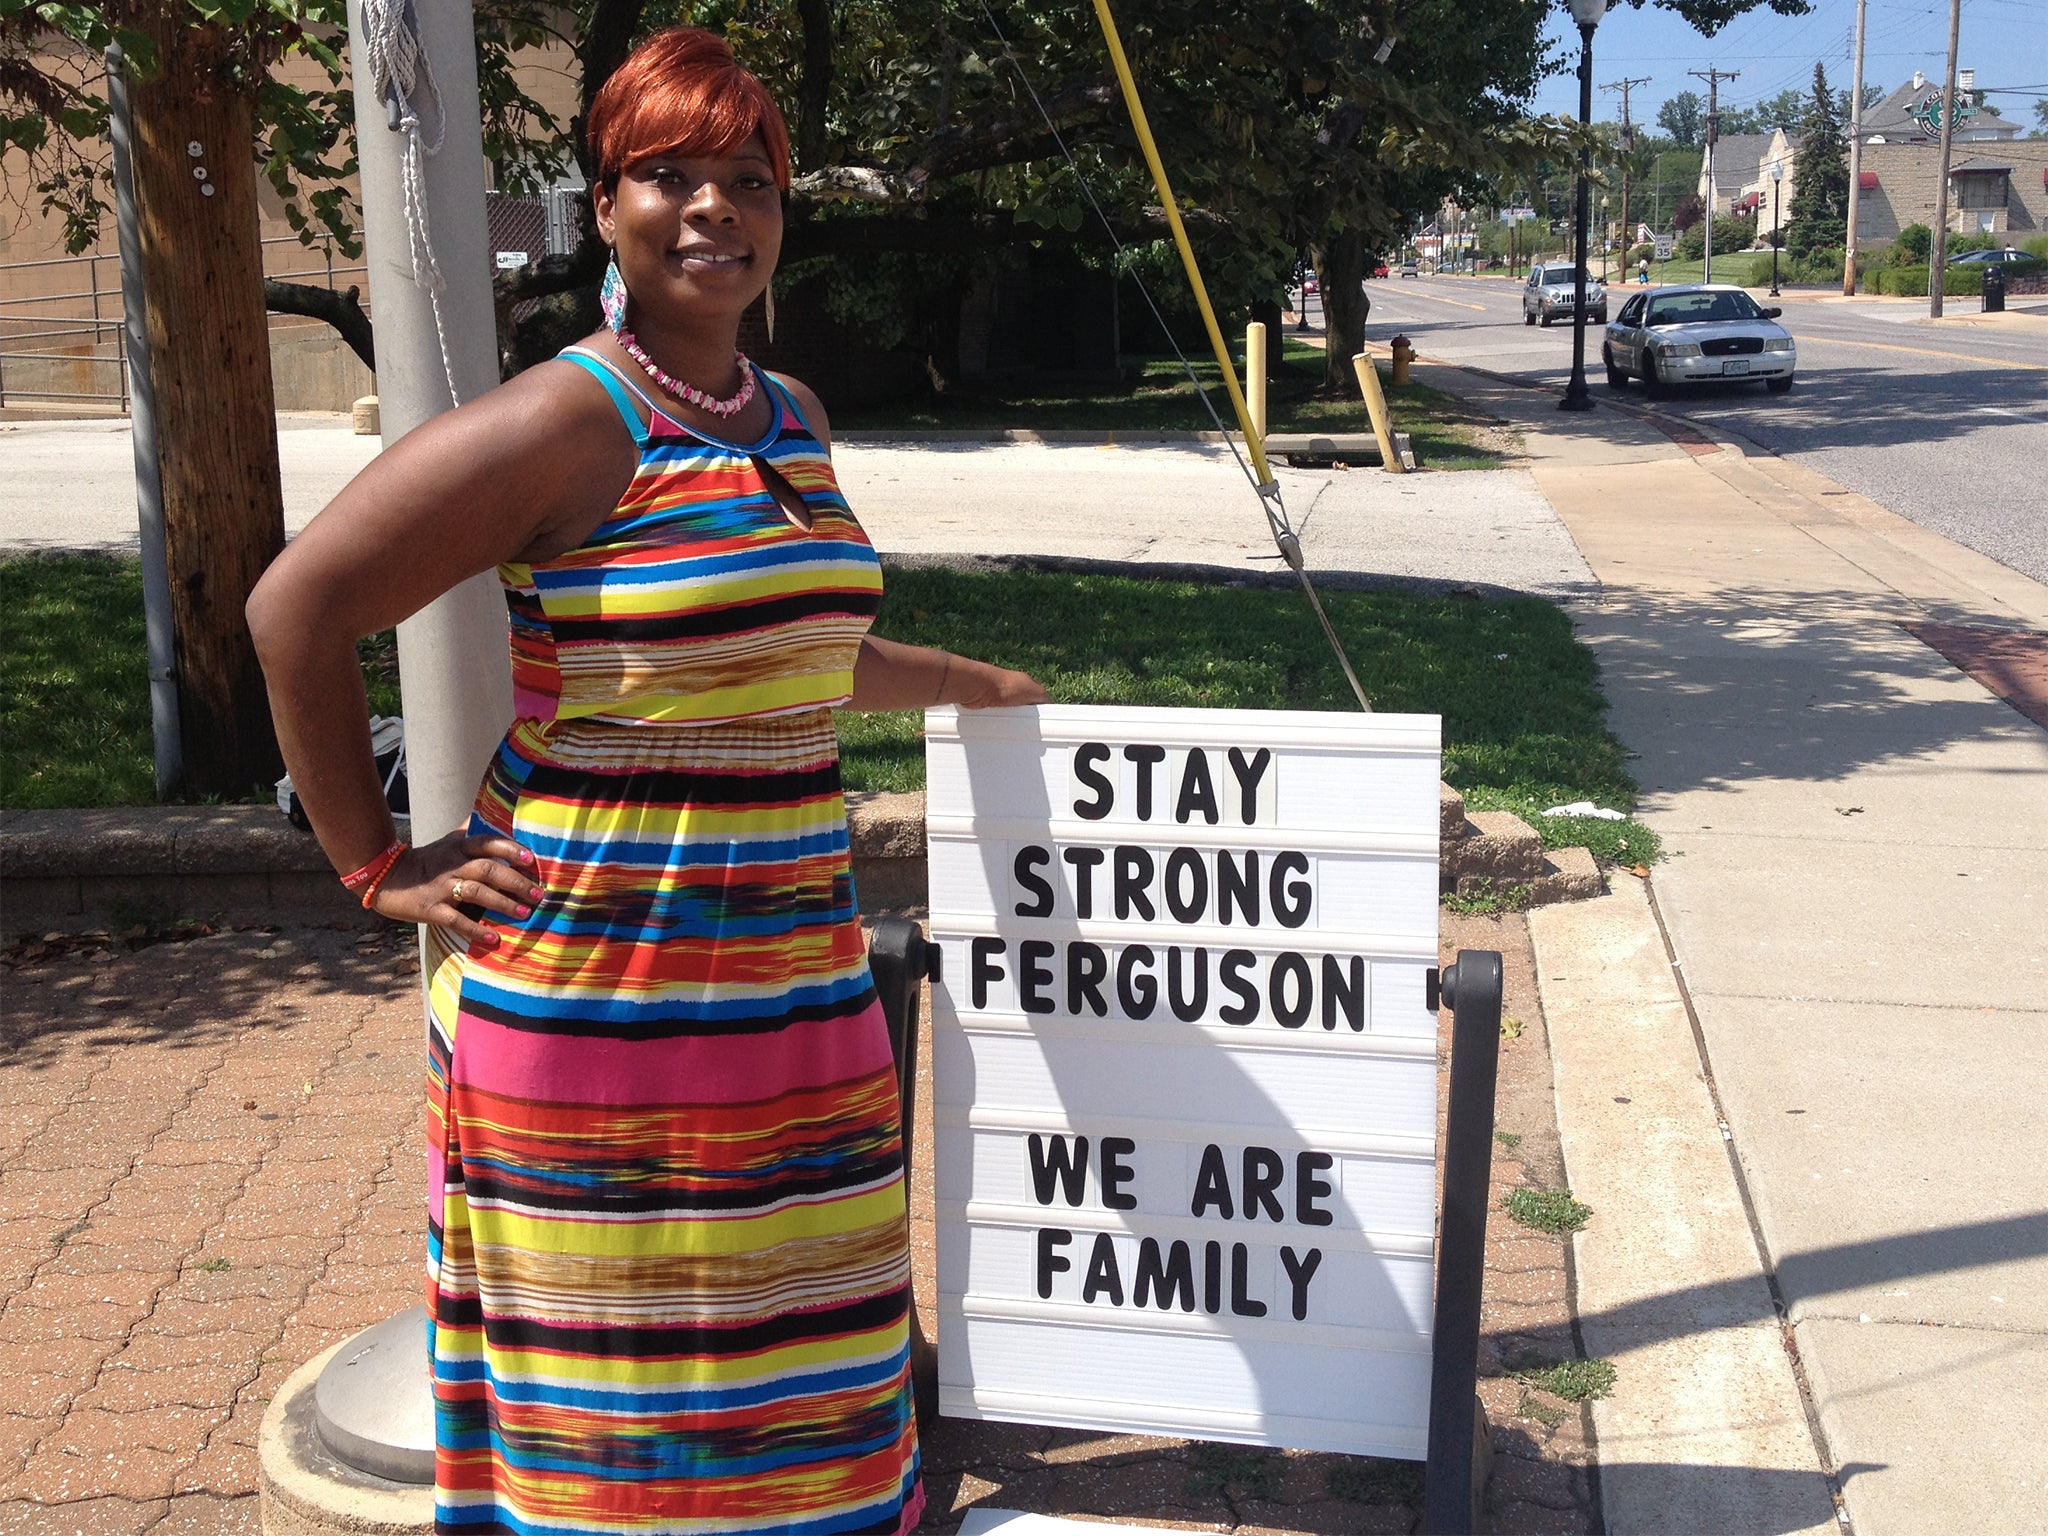 Jernetta Conner says she may be forced to move her family away from Ferguson if the civil unrest continues